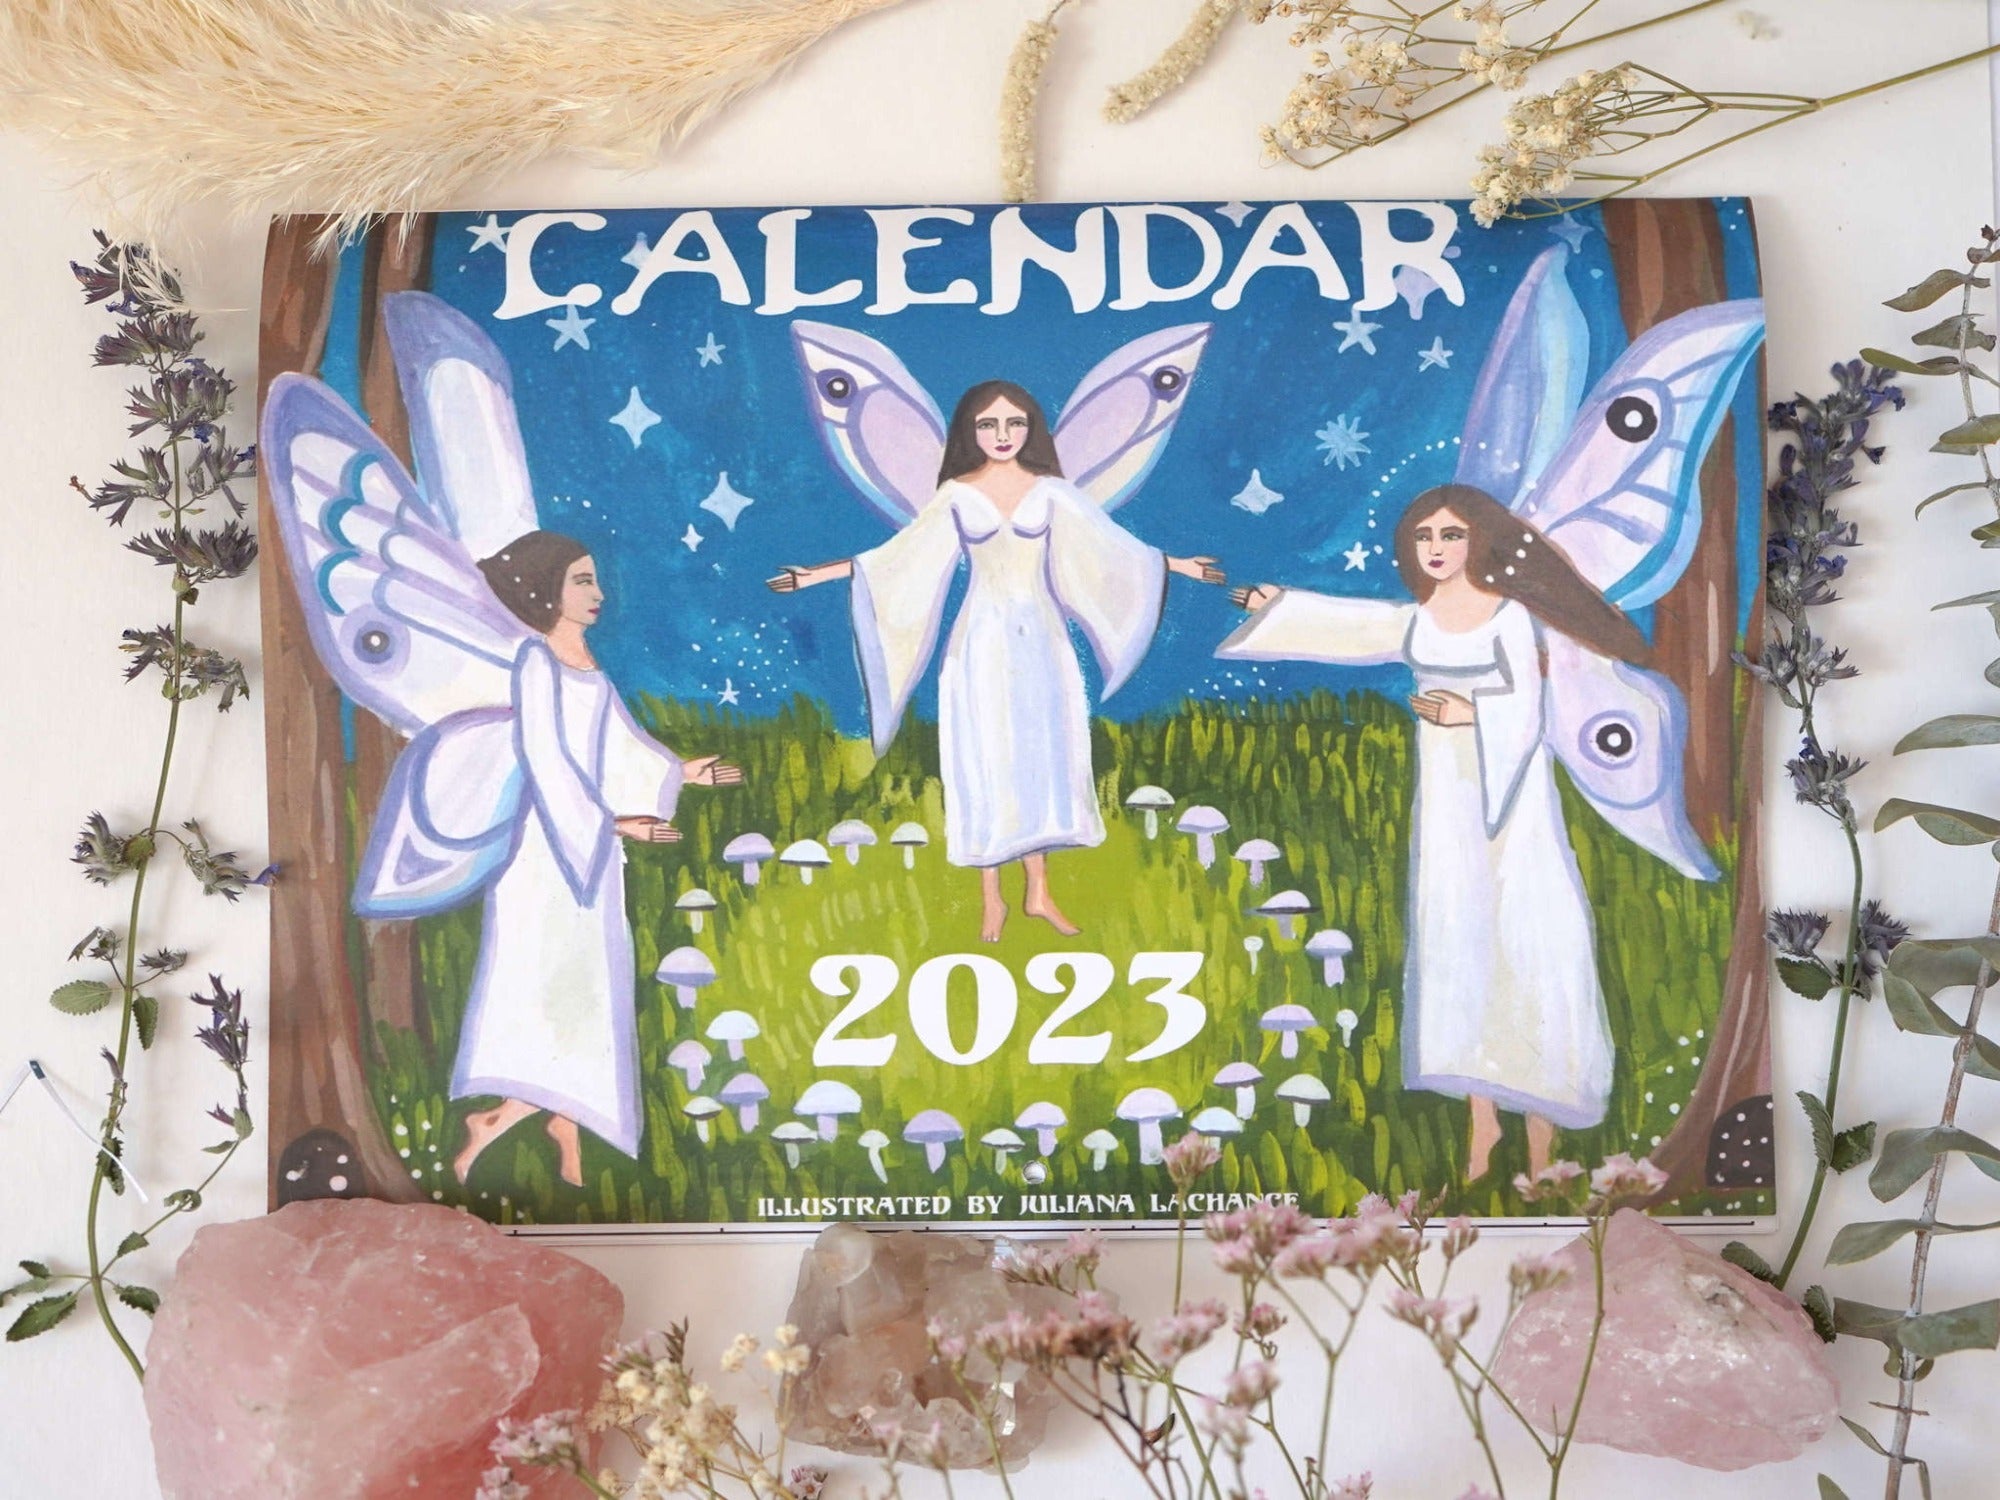 2023 Calendar Pre- order, designed and illustrated by Juliana Lachance, free shipping